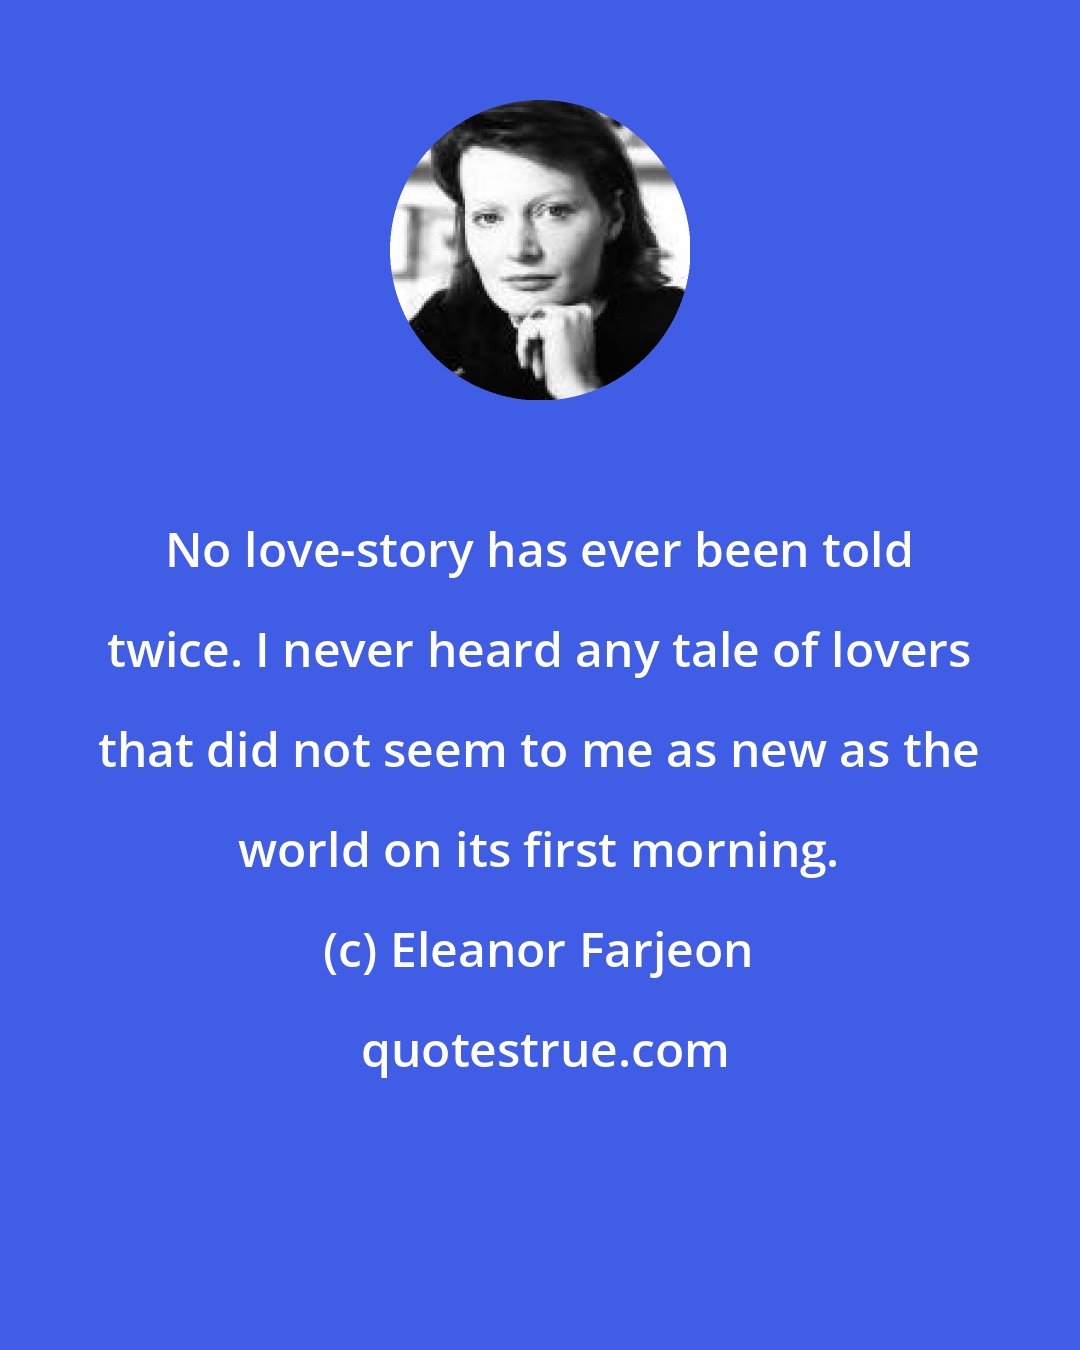 Eleanor Farjeon: No love-story has ever been told twice. I never heard any tale of lovers that did not seem to me as new as the world on its first morning.